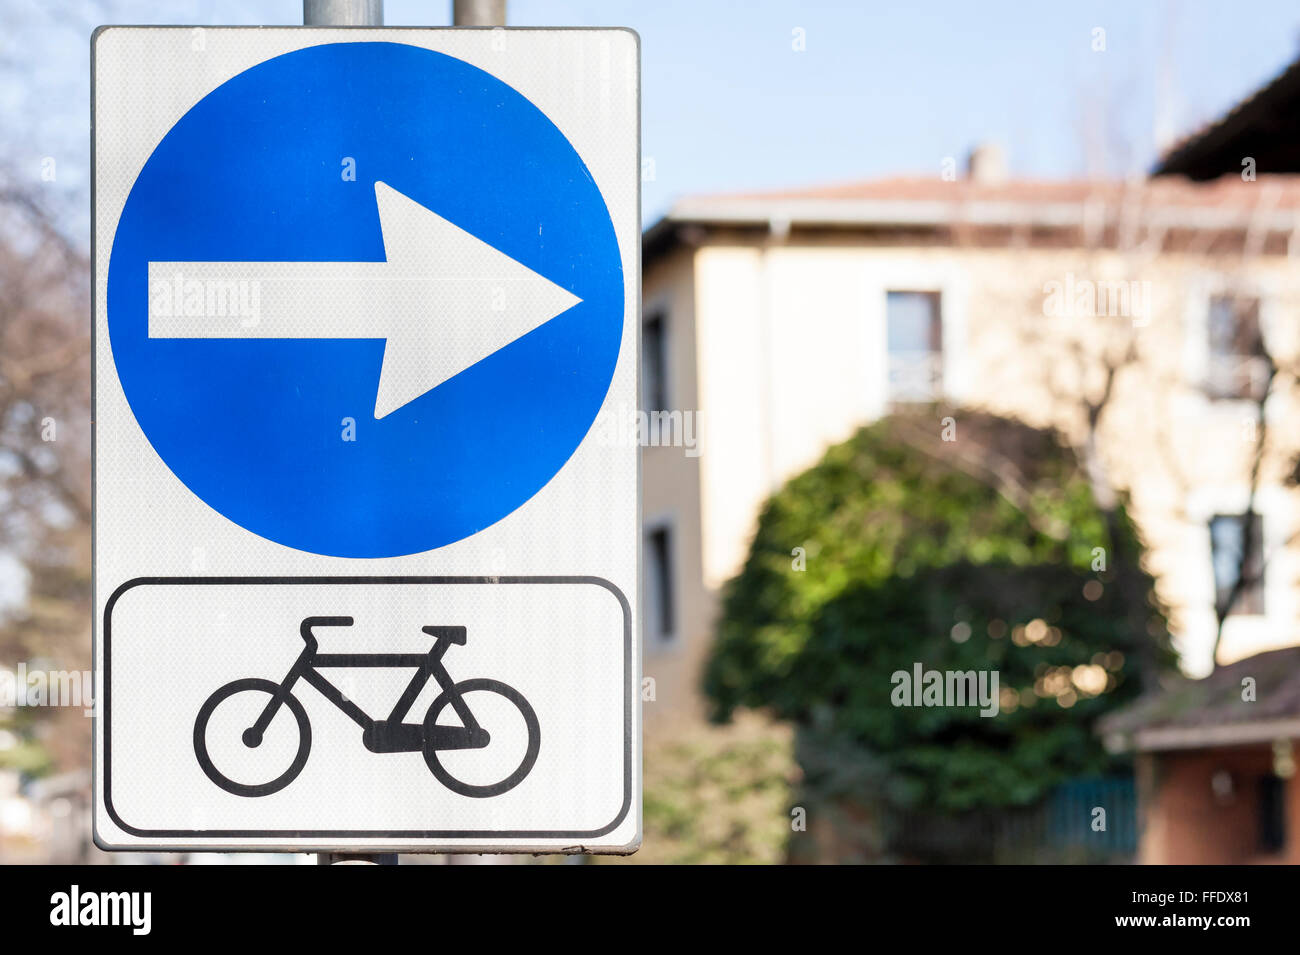 Road sign indicating the direction of the bike path. Stock Photo